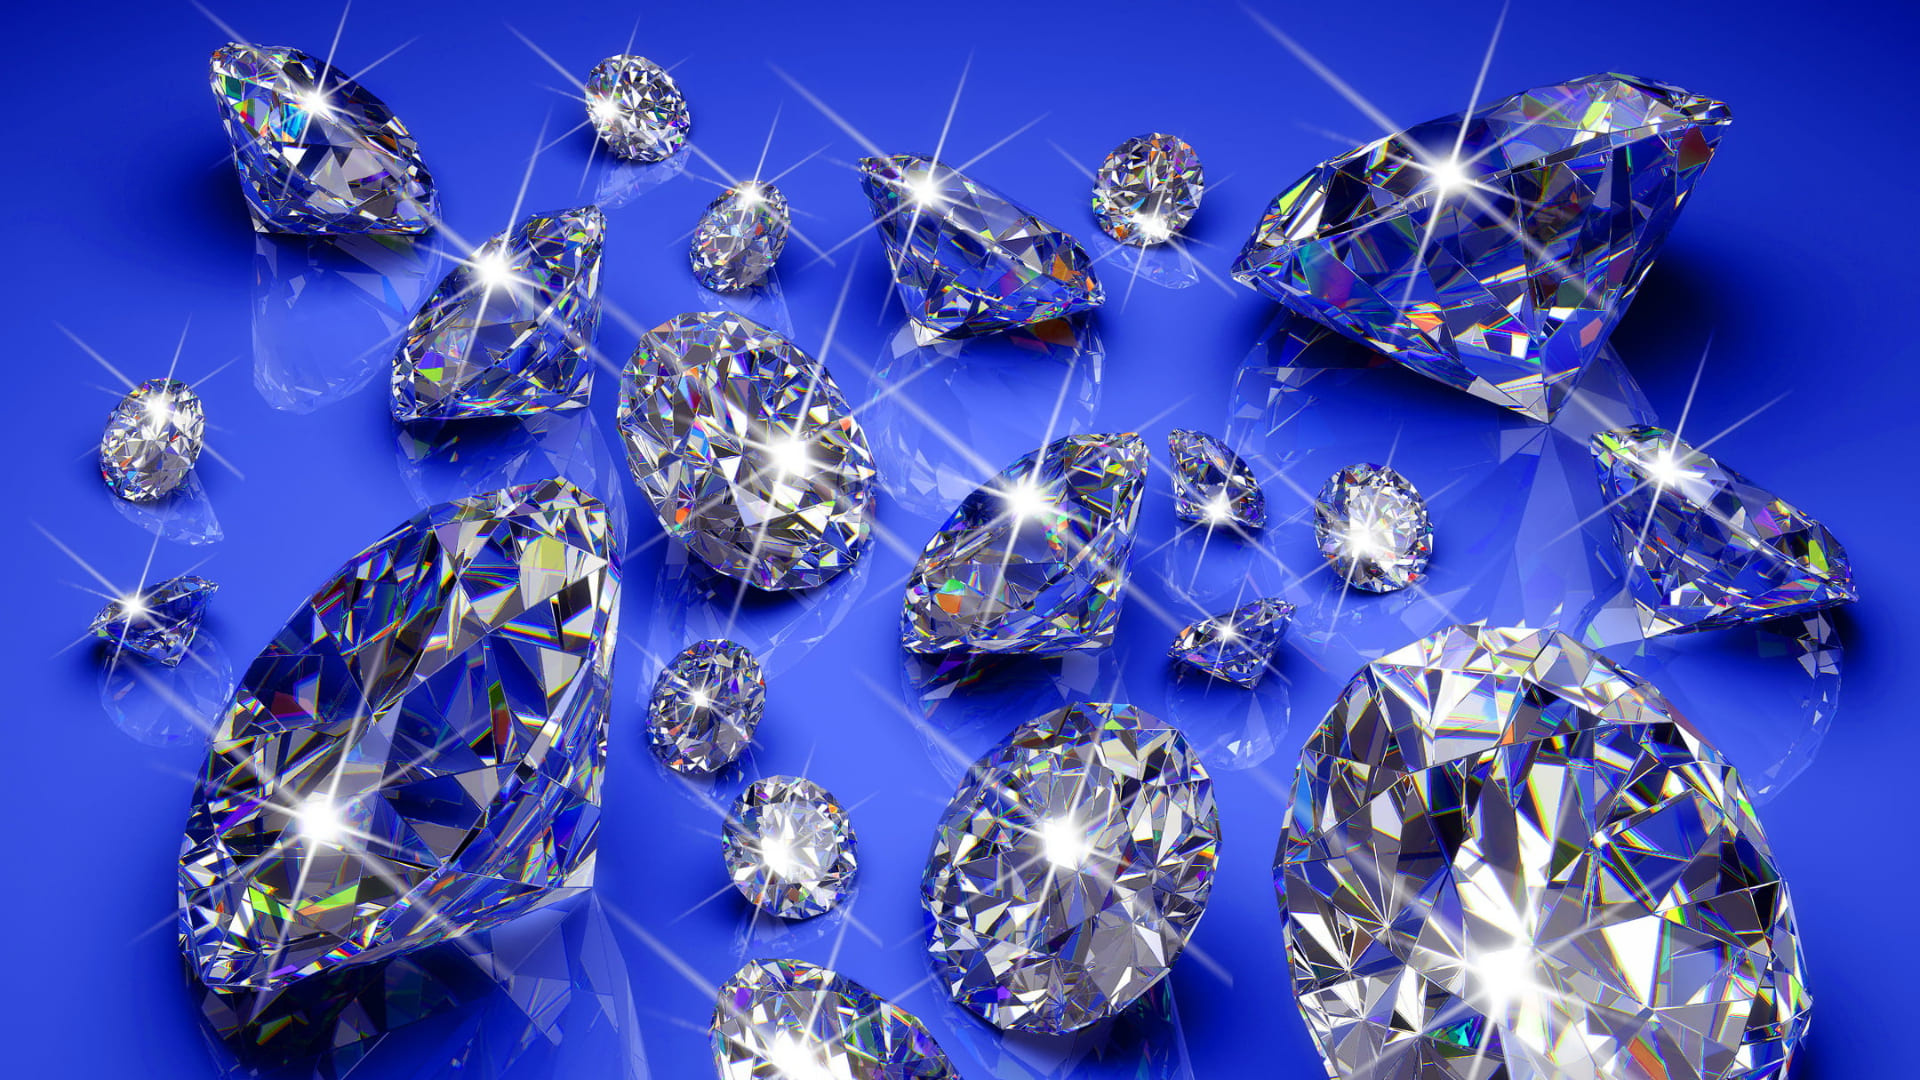 Best diamond wallpapers, High-quality visuals, Stunning 4K images, Crystal-clear gemstone, 1920x1080 Full HD Desktop